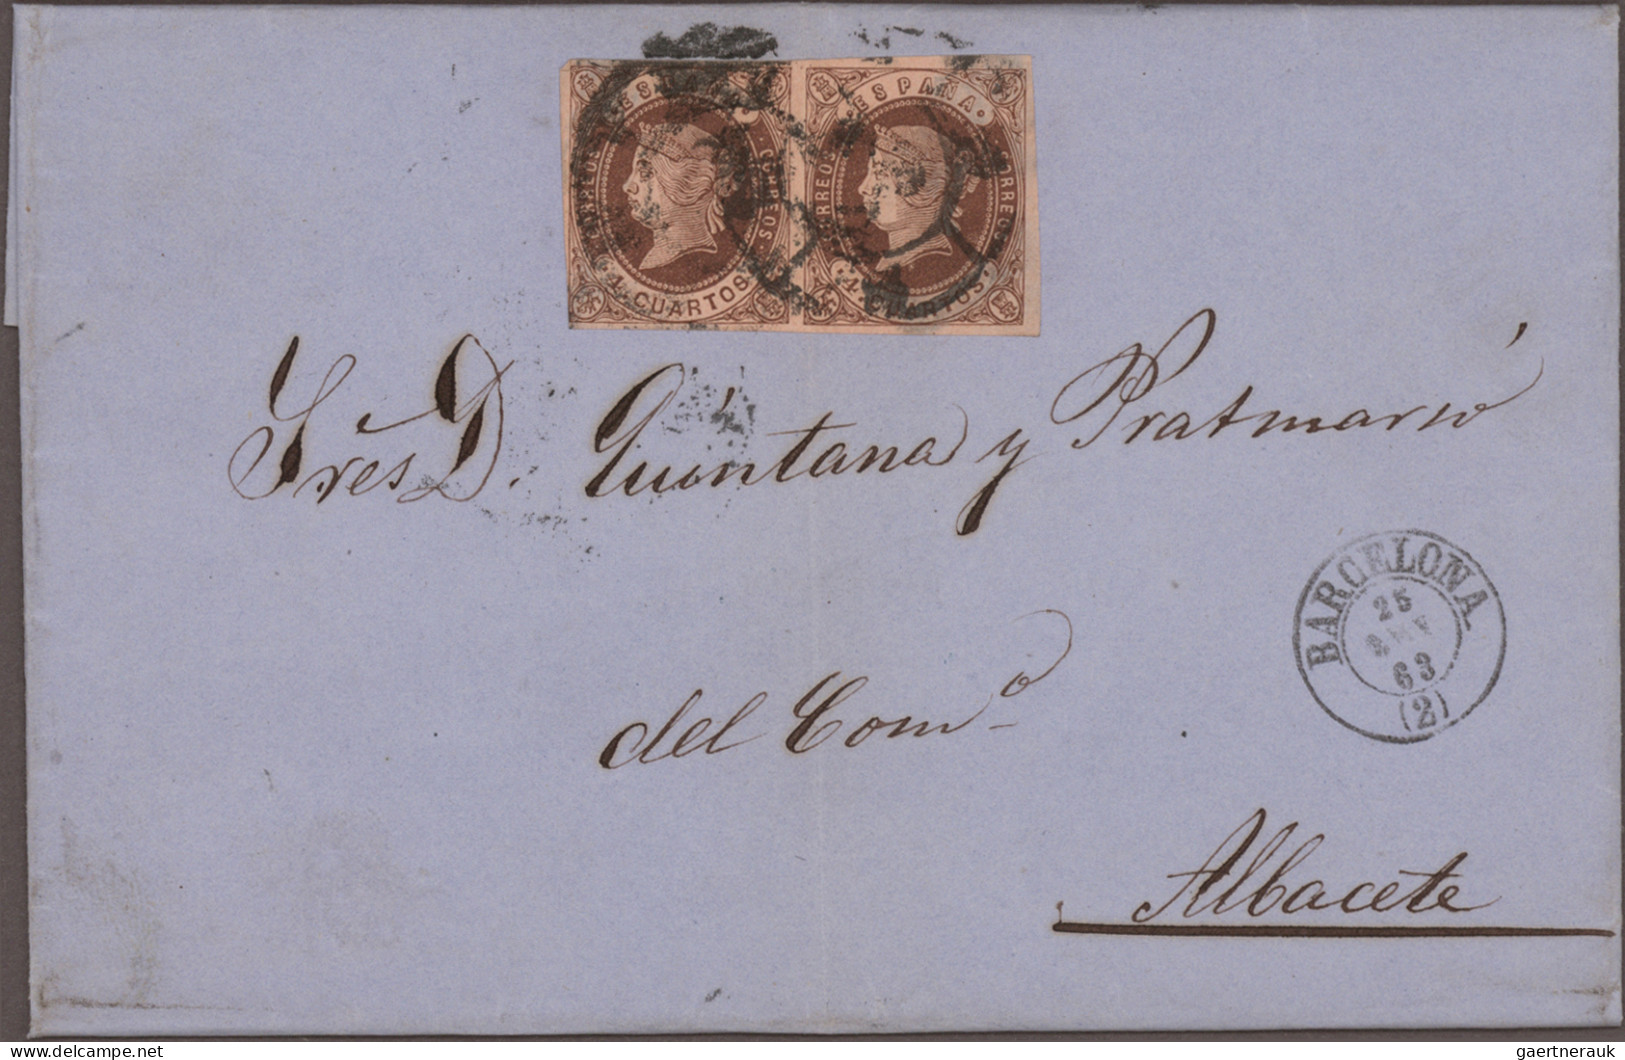 Spain: 1854-1868 ca.: About 420 folded covers used inland, all franked by stamps